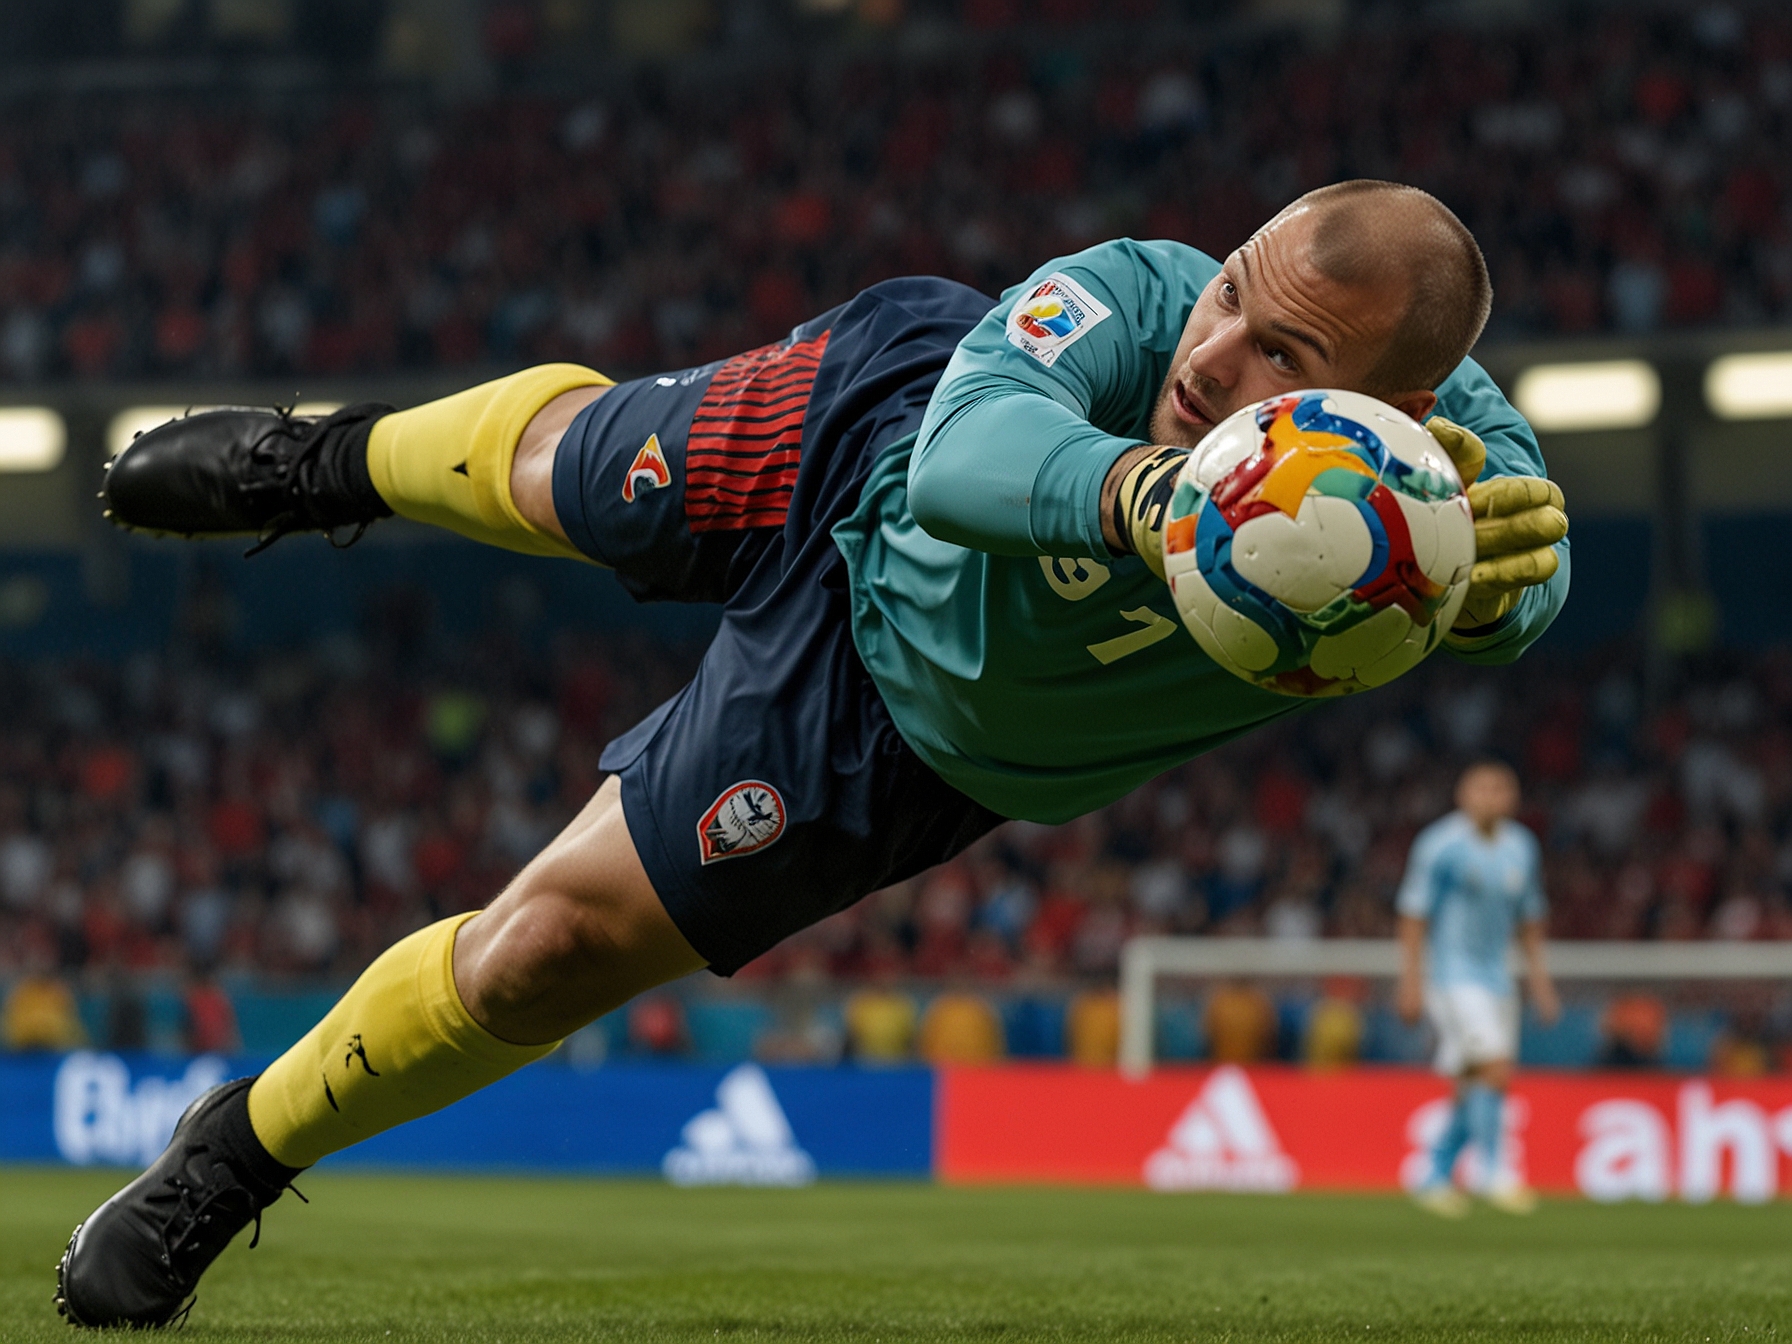 Canadian goalkeeper Milan Borjan makes a crucial save during the first half of the Copa America match against Argentina, highlighting Canada's disciplined defense and tactical prowess.